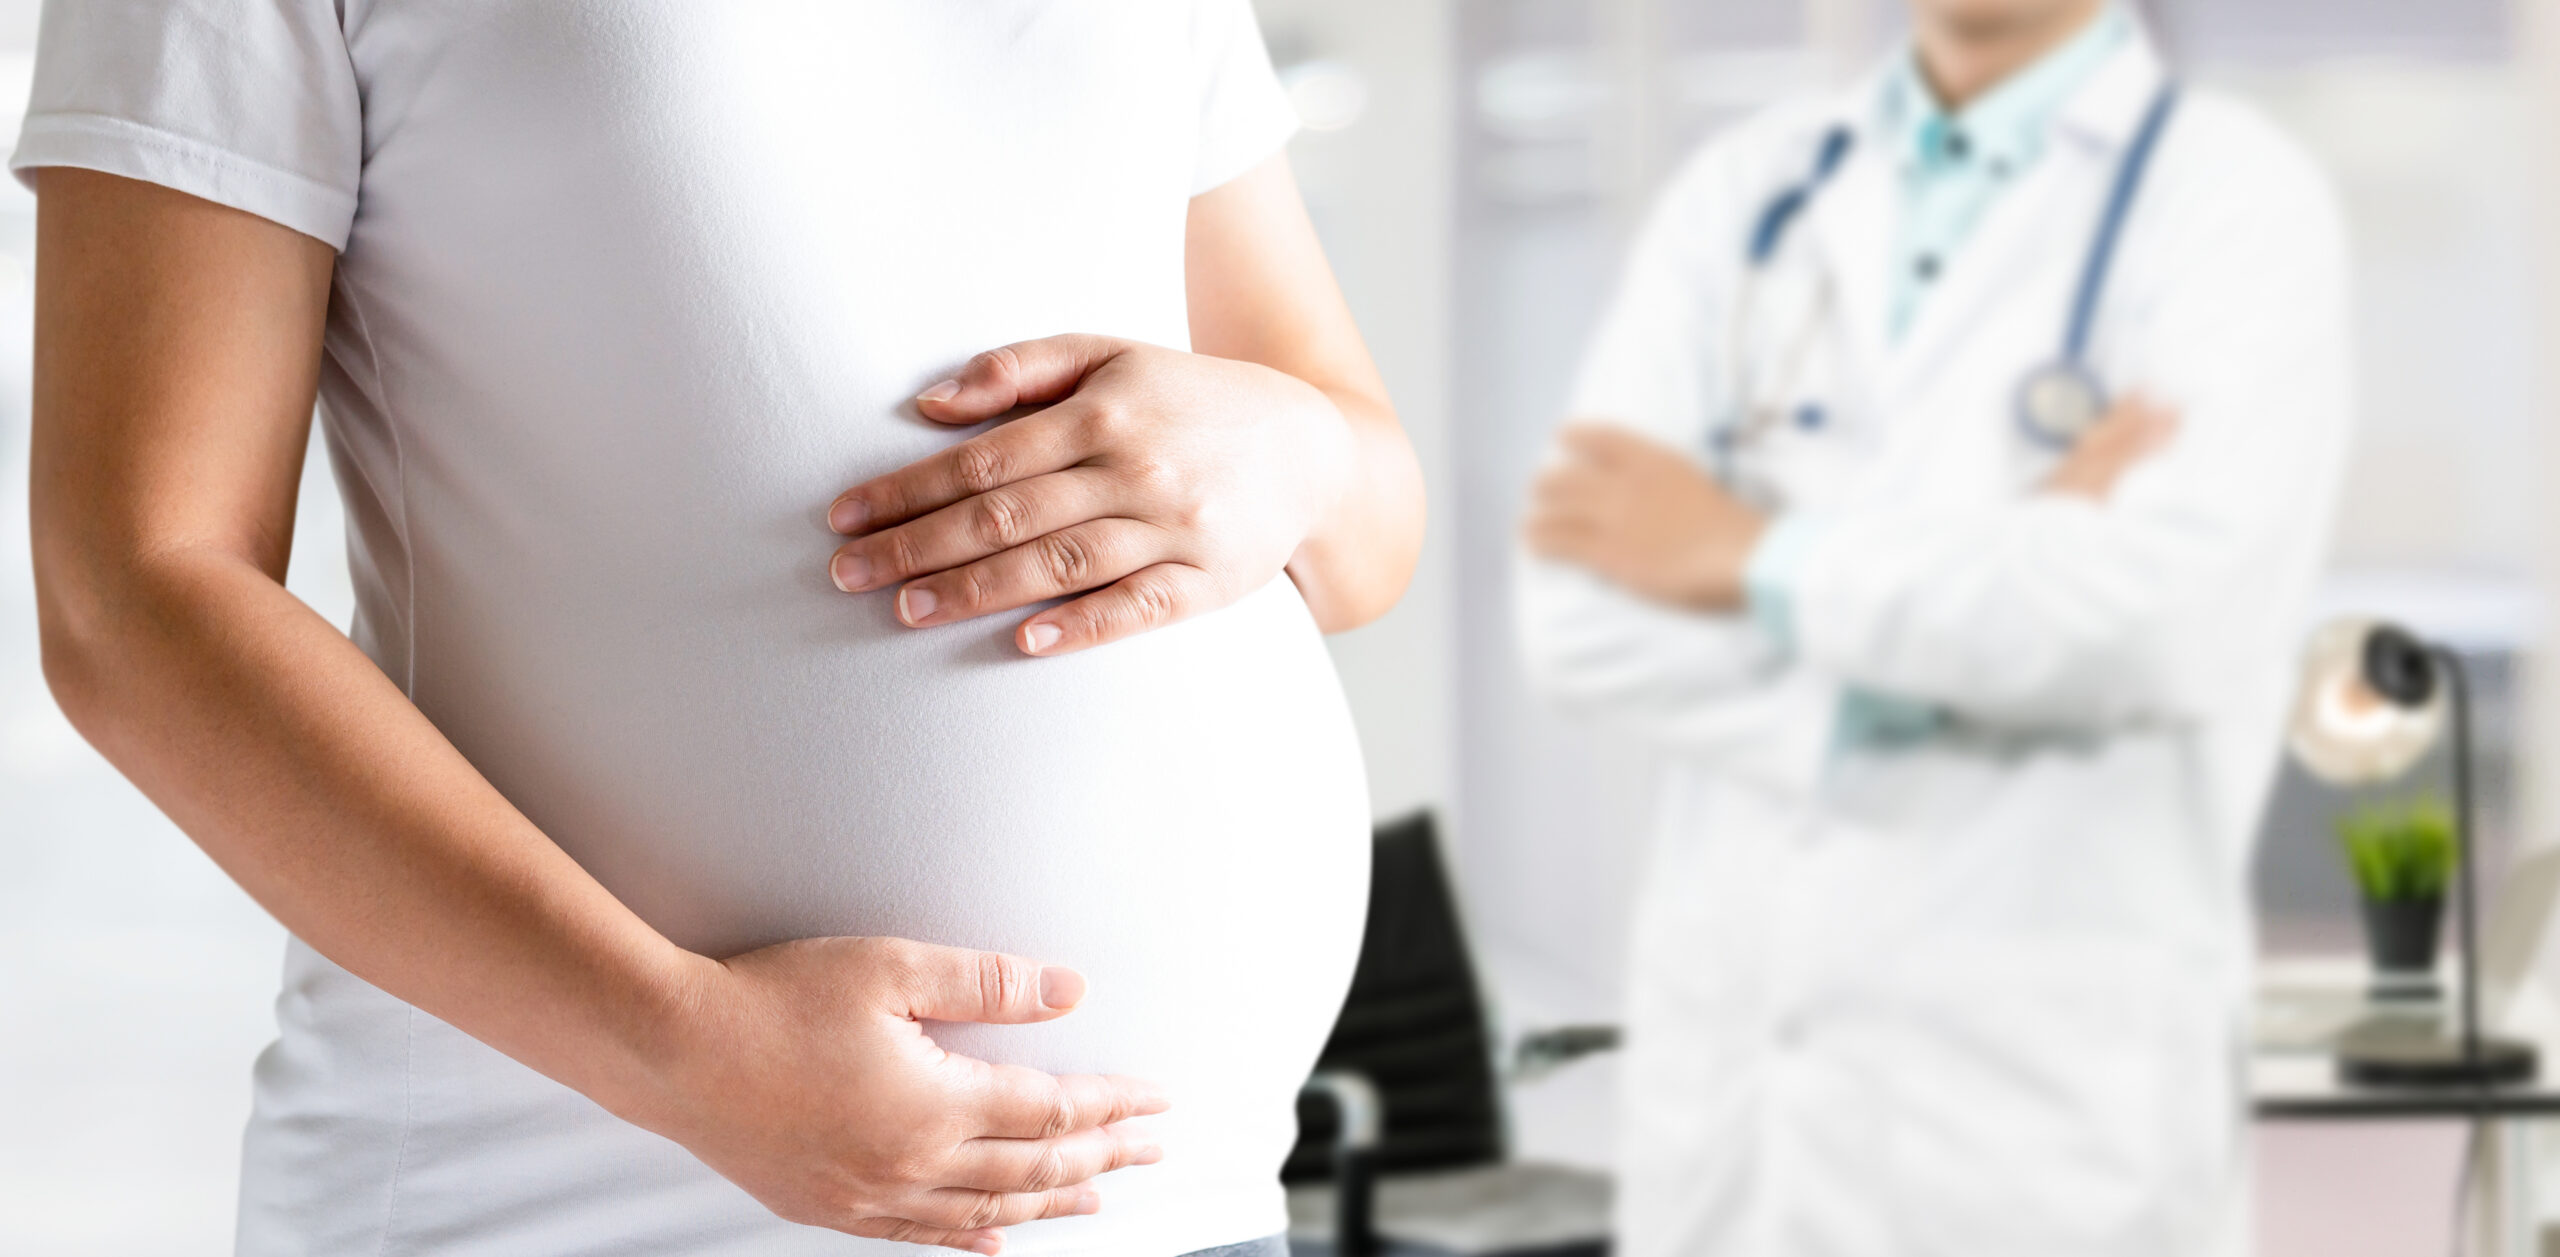 Pregnant woman standing while touching her belly with a doctor in the background.